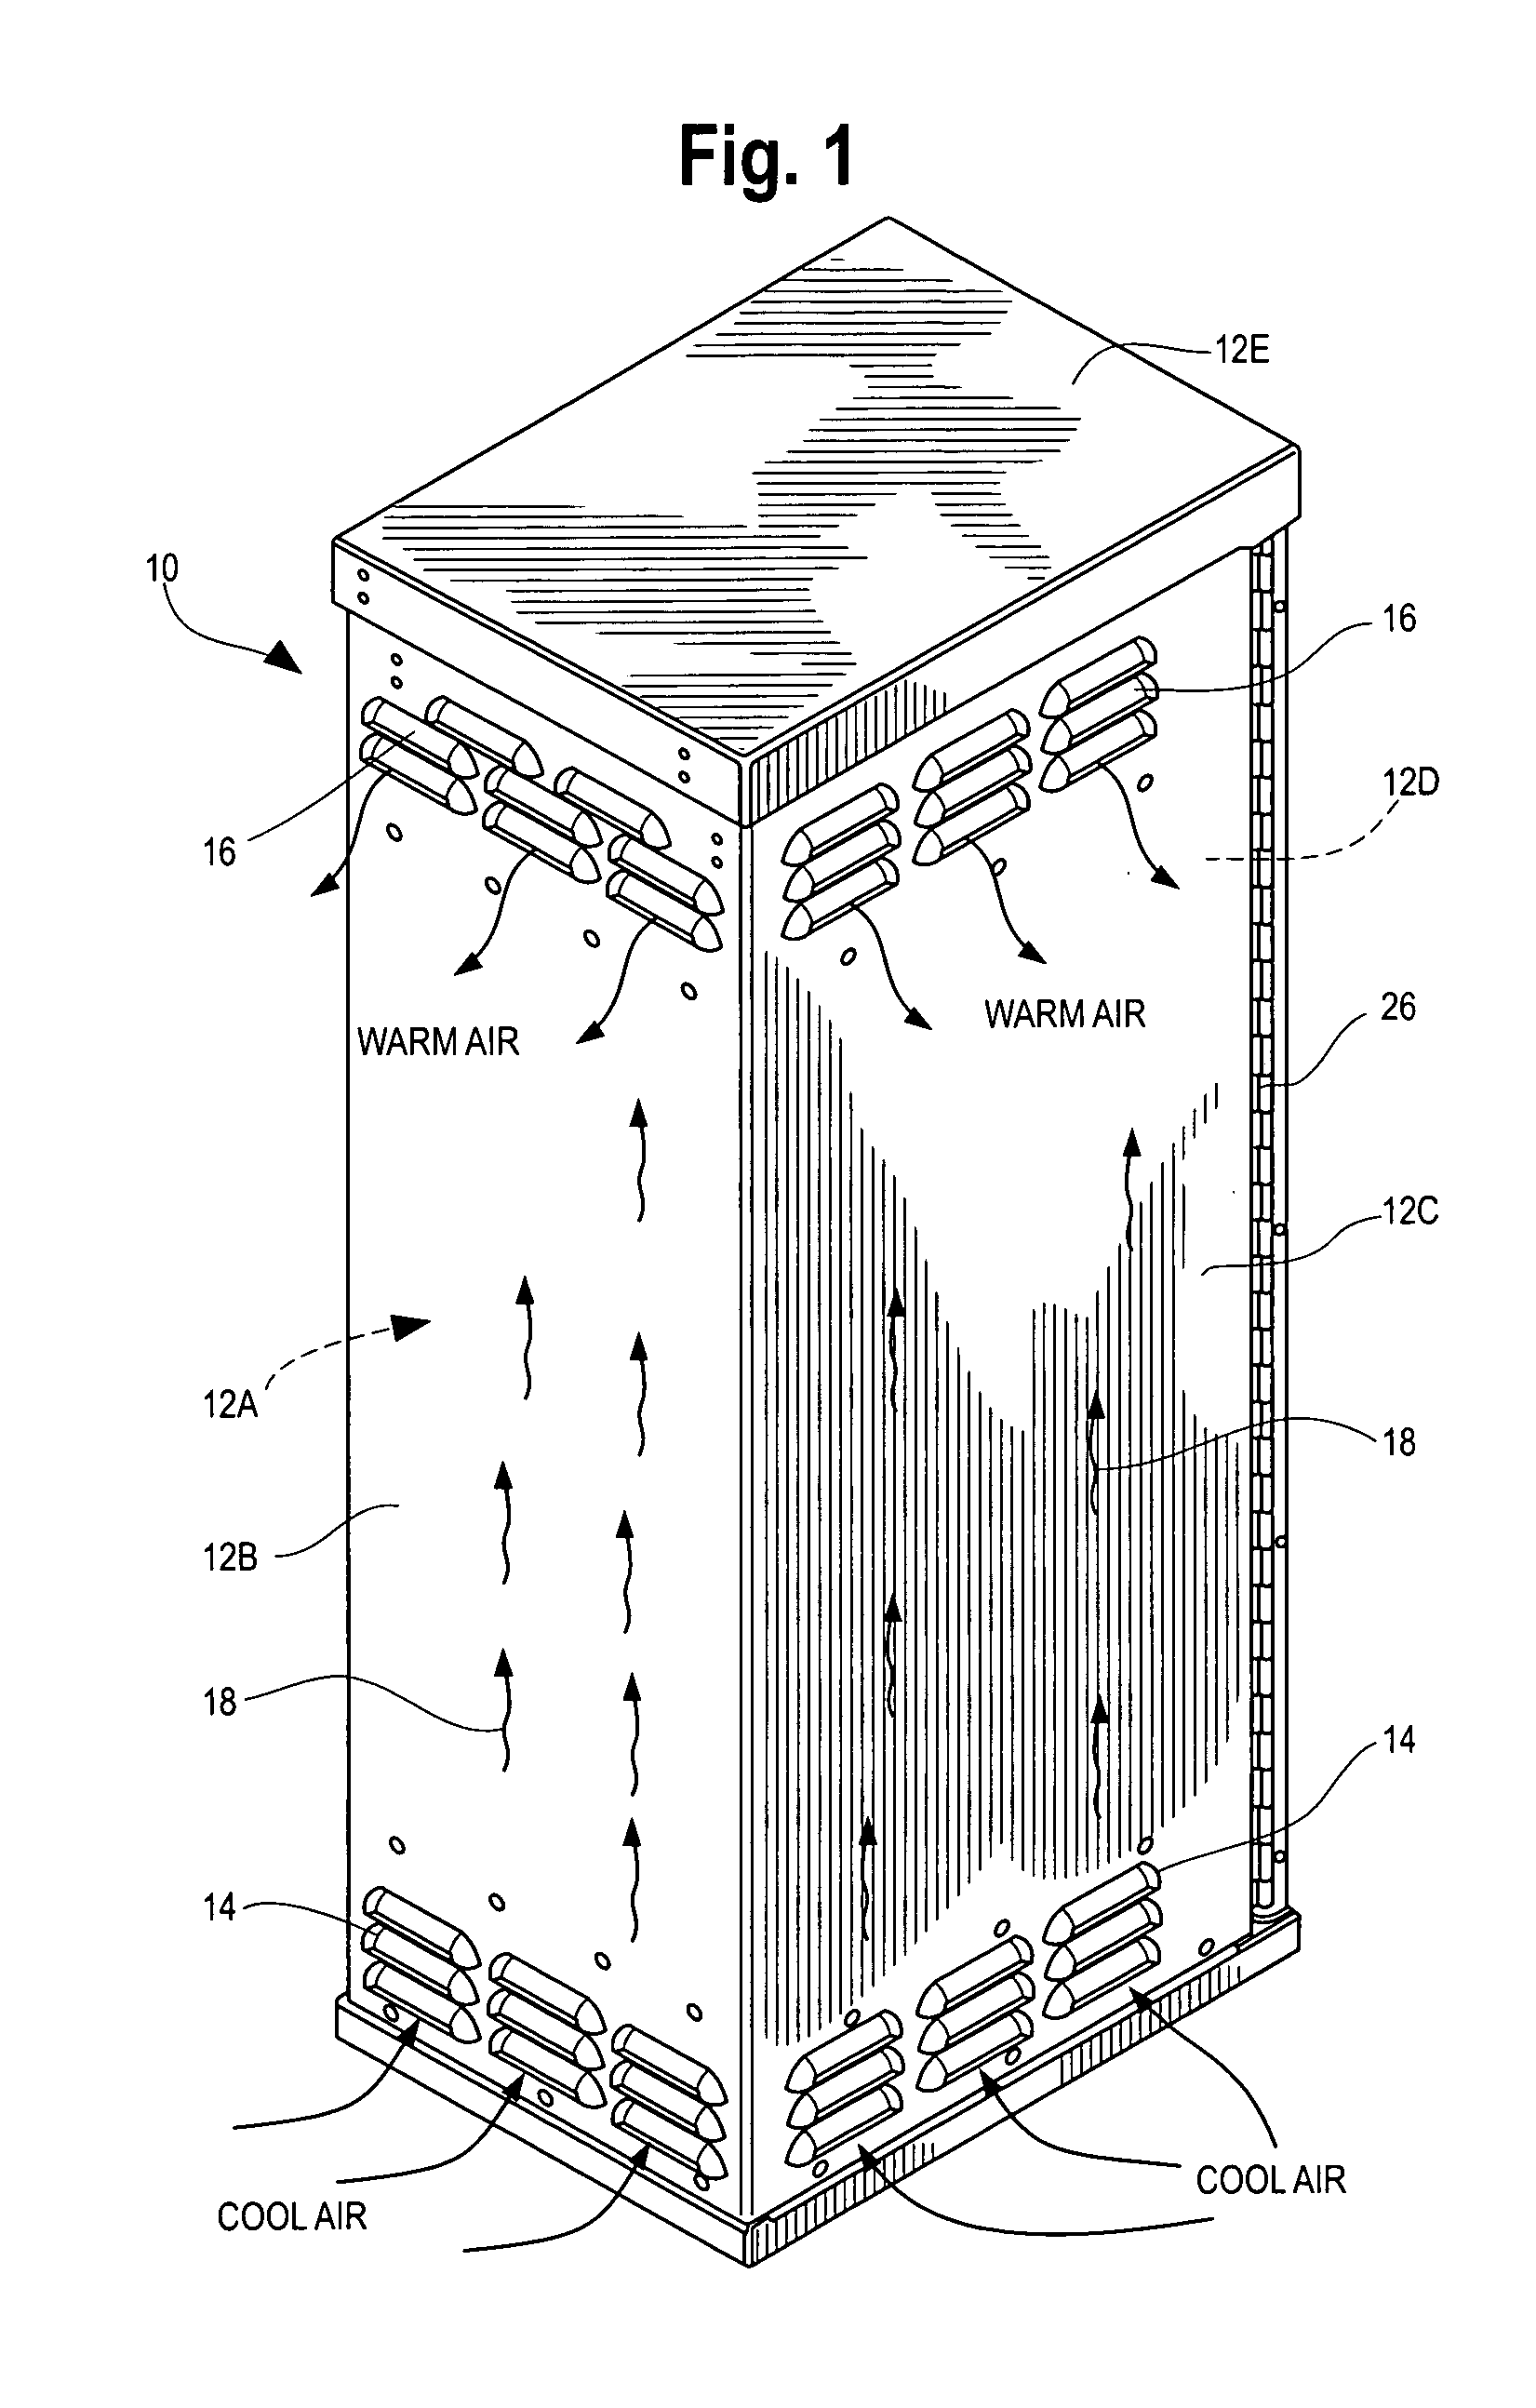 Electronics cabinet with internal air-to-air heat exchanger